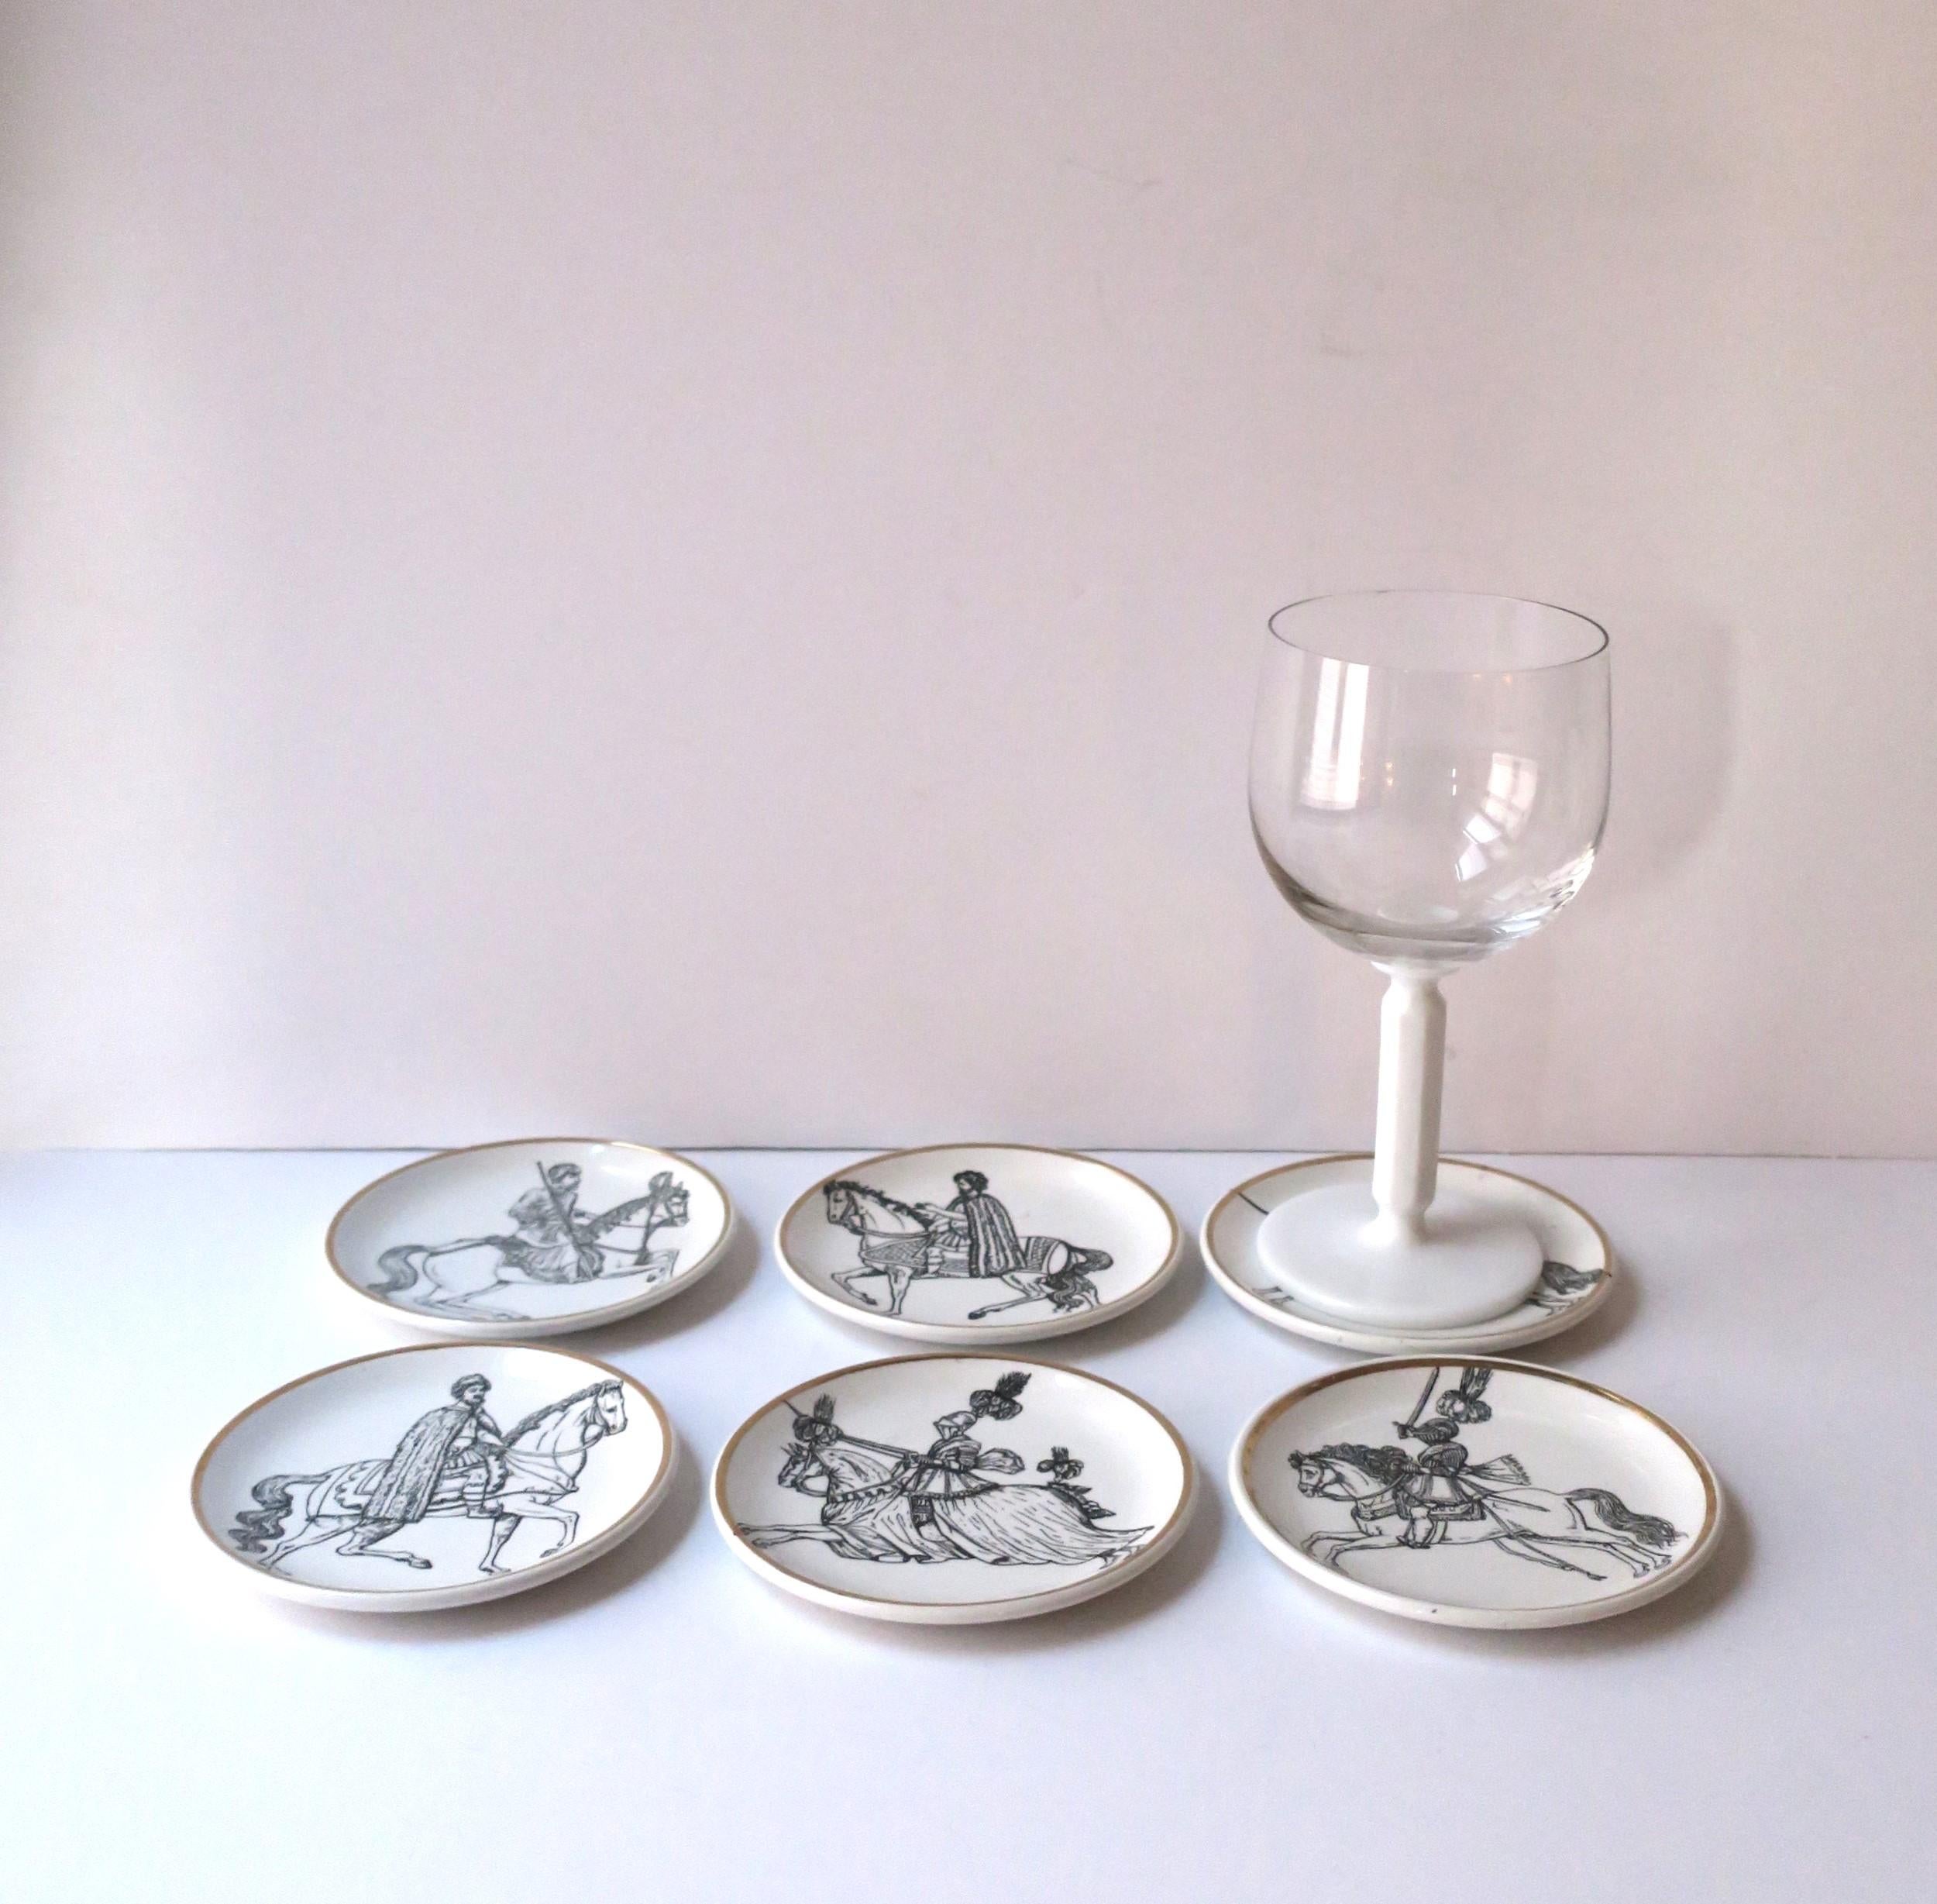 20th Century Rosenthal Studio-Line Wine or Cocktail Glasses with White Glass Stem, Set of 4 For Sale